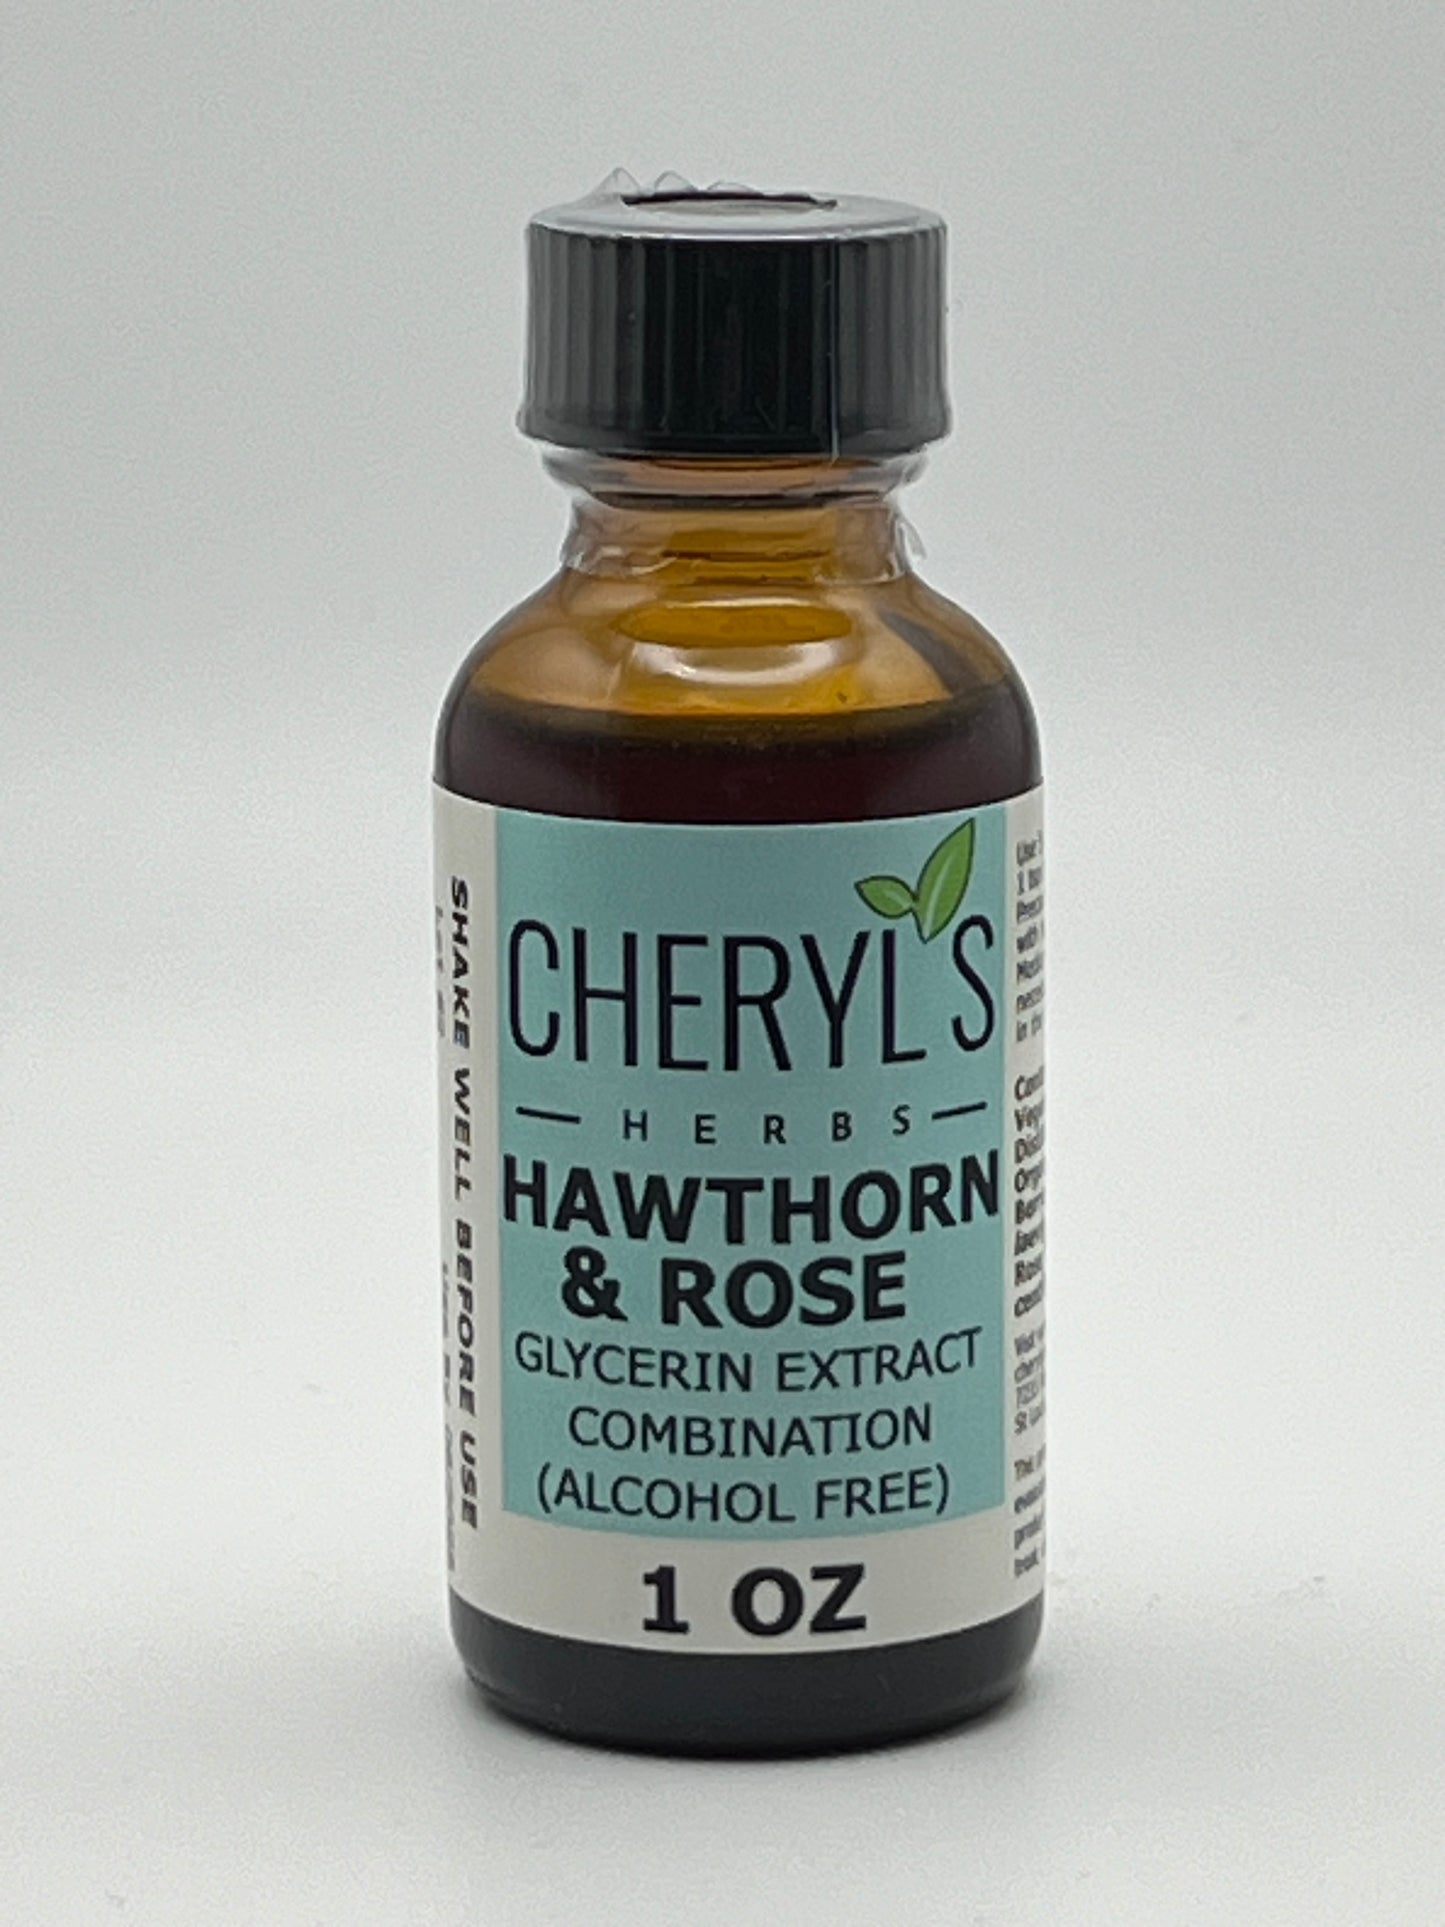 HAWTHORN ROSE GLYCERIN EXTRACT COMBINATION